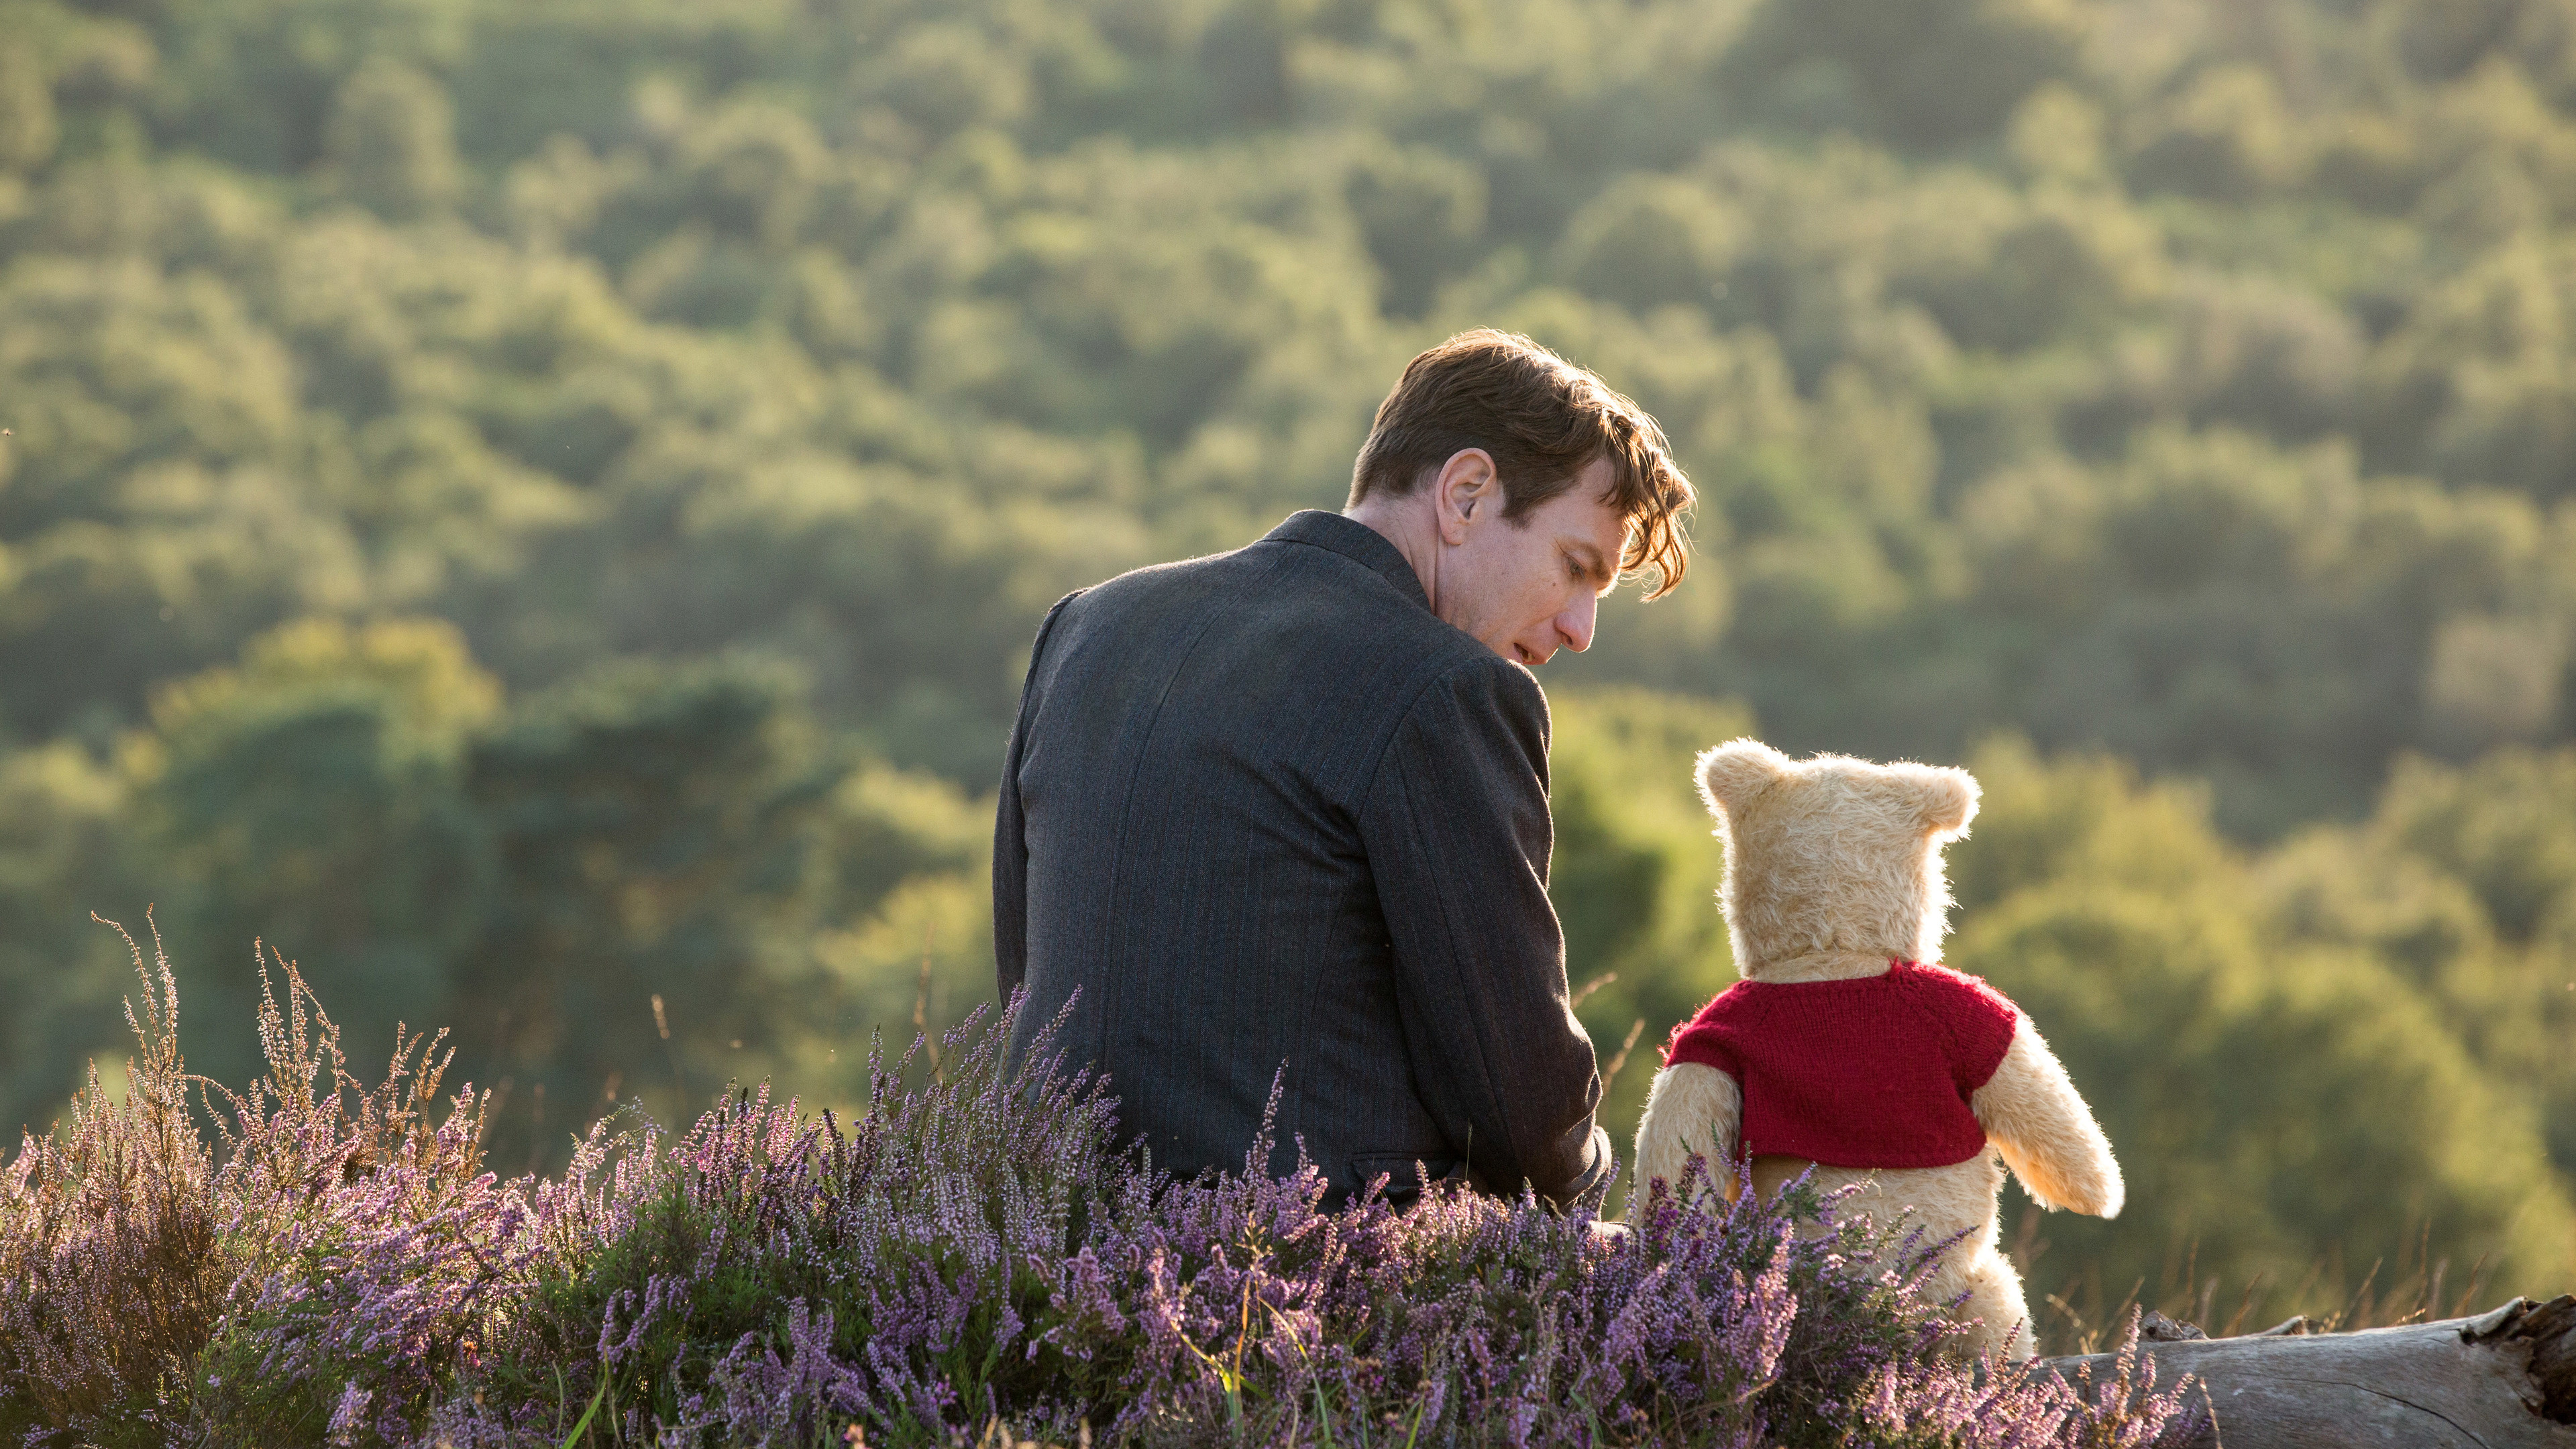 Christopher Robin (Movie): A live-action sequel to A.A. Milne's classic Winnie the Pooh stories. 3840x2160 4K Wallpaper.